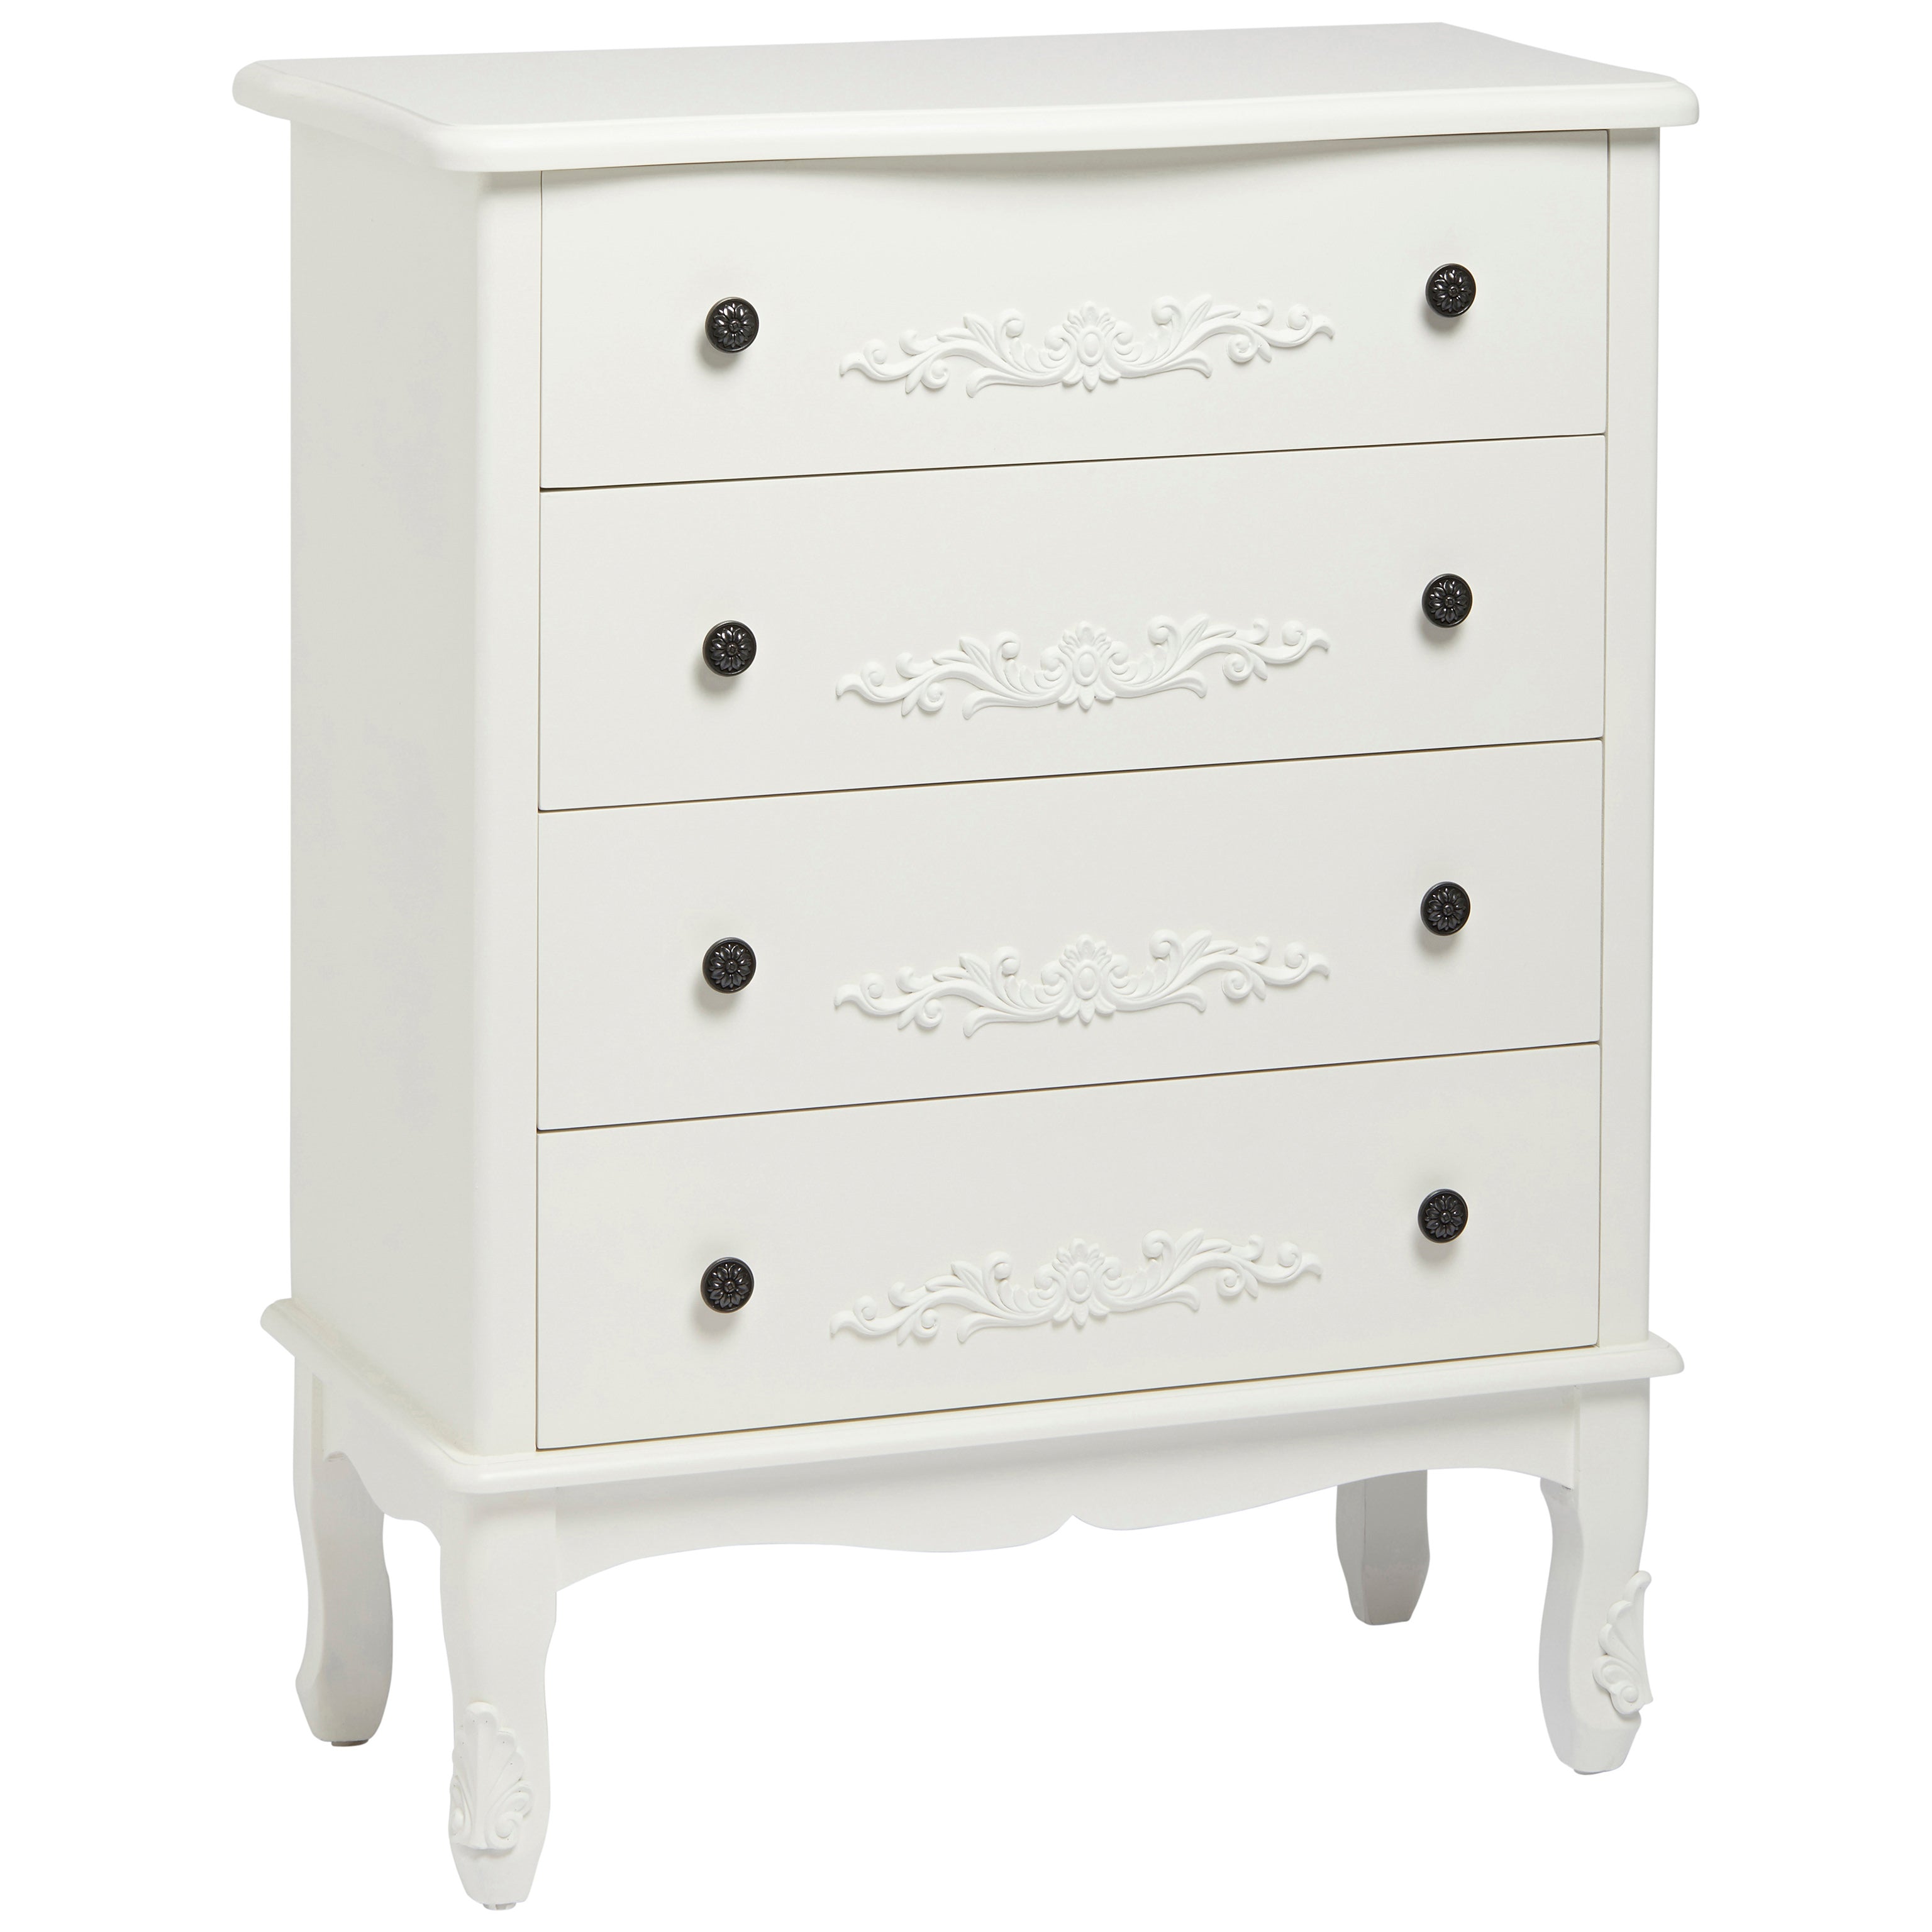 Shabby Chic French Bedroom Chest Of 4 Drawers Black White